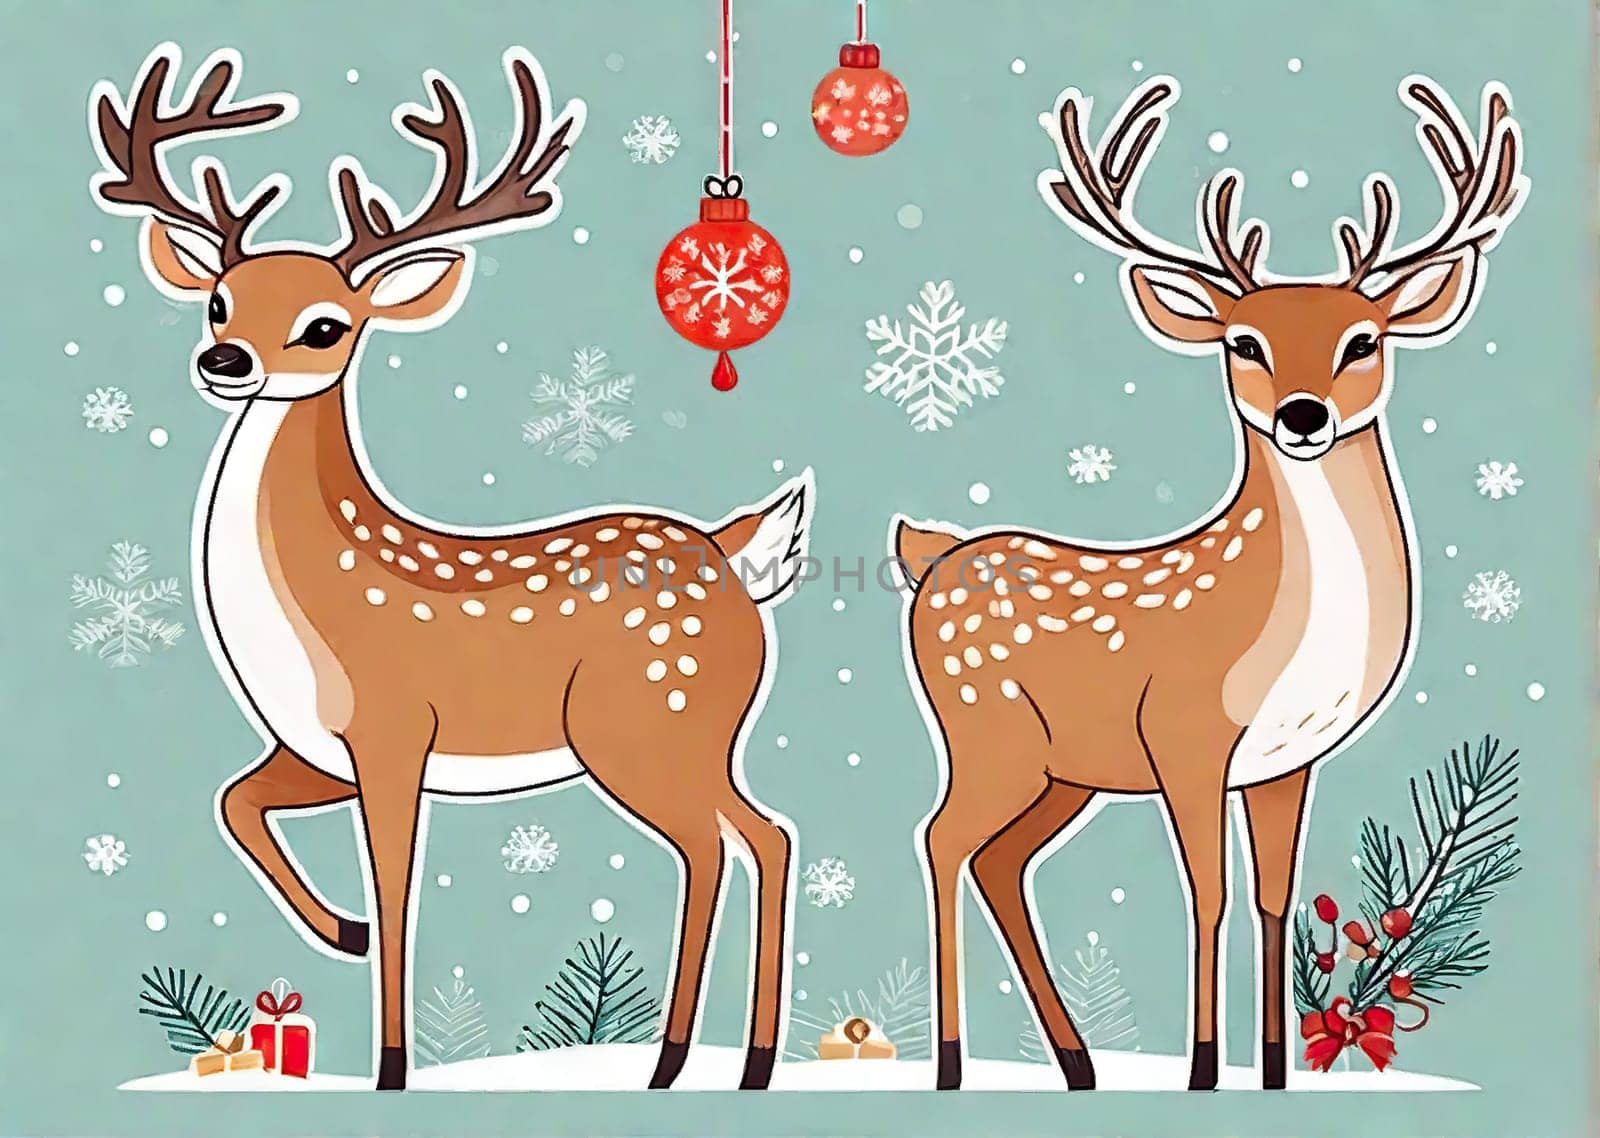 Painted deer with Christmas tree and gifts to create holiday cards, backgrounds and decorations. by EkaterinaPereslavtseva